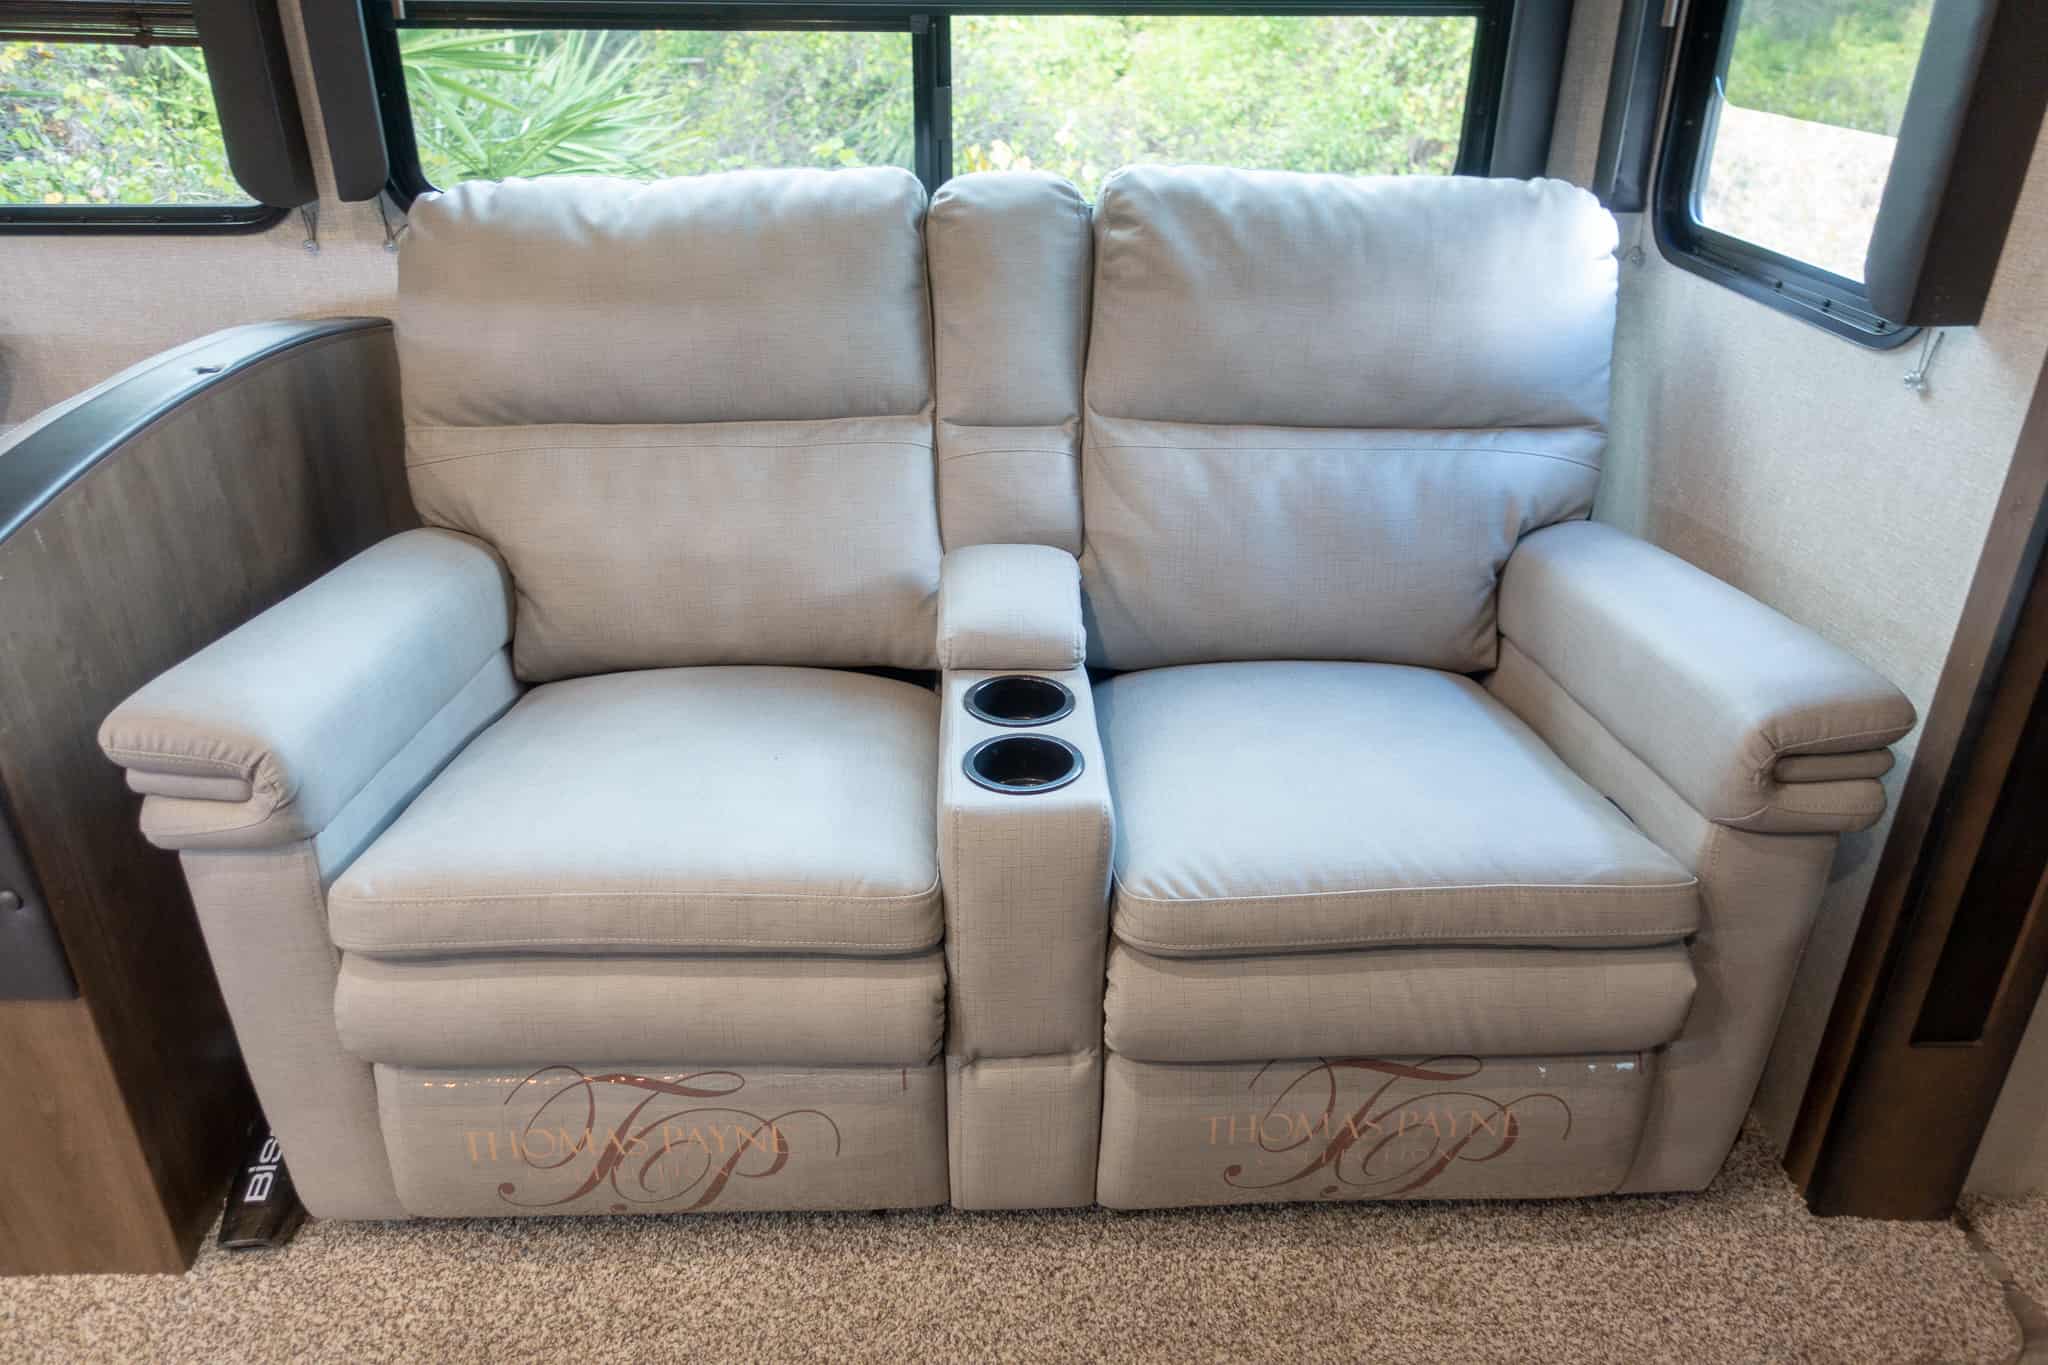 50 sofa bed for motorhome